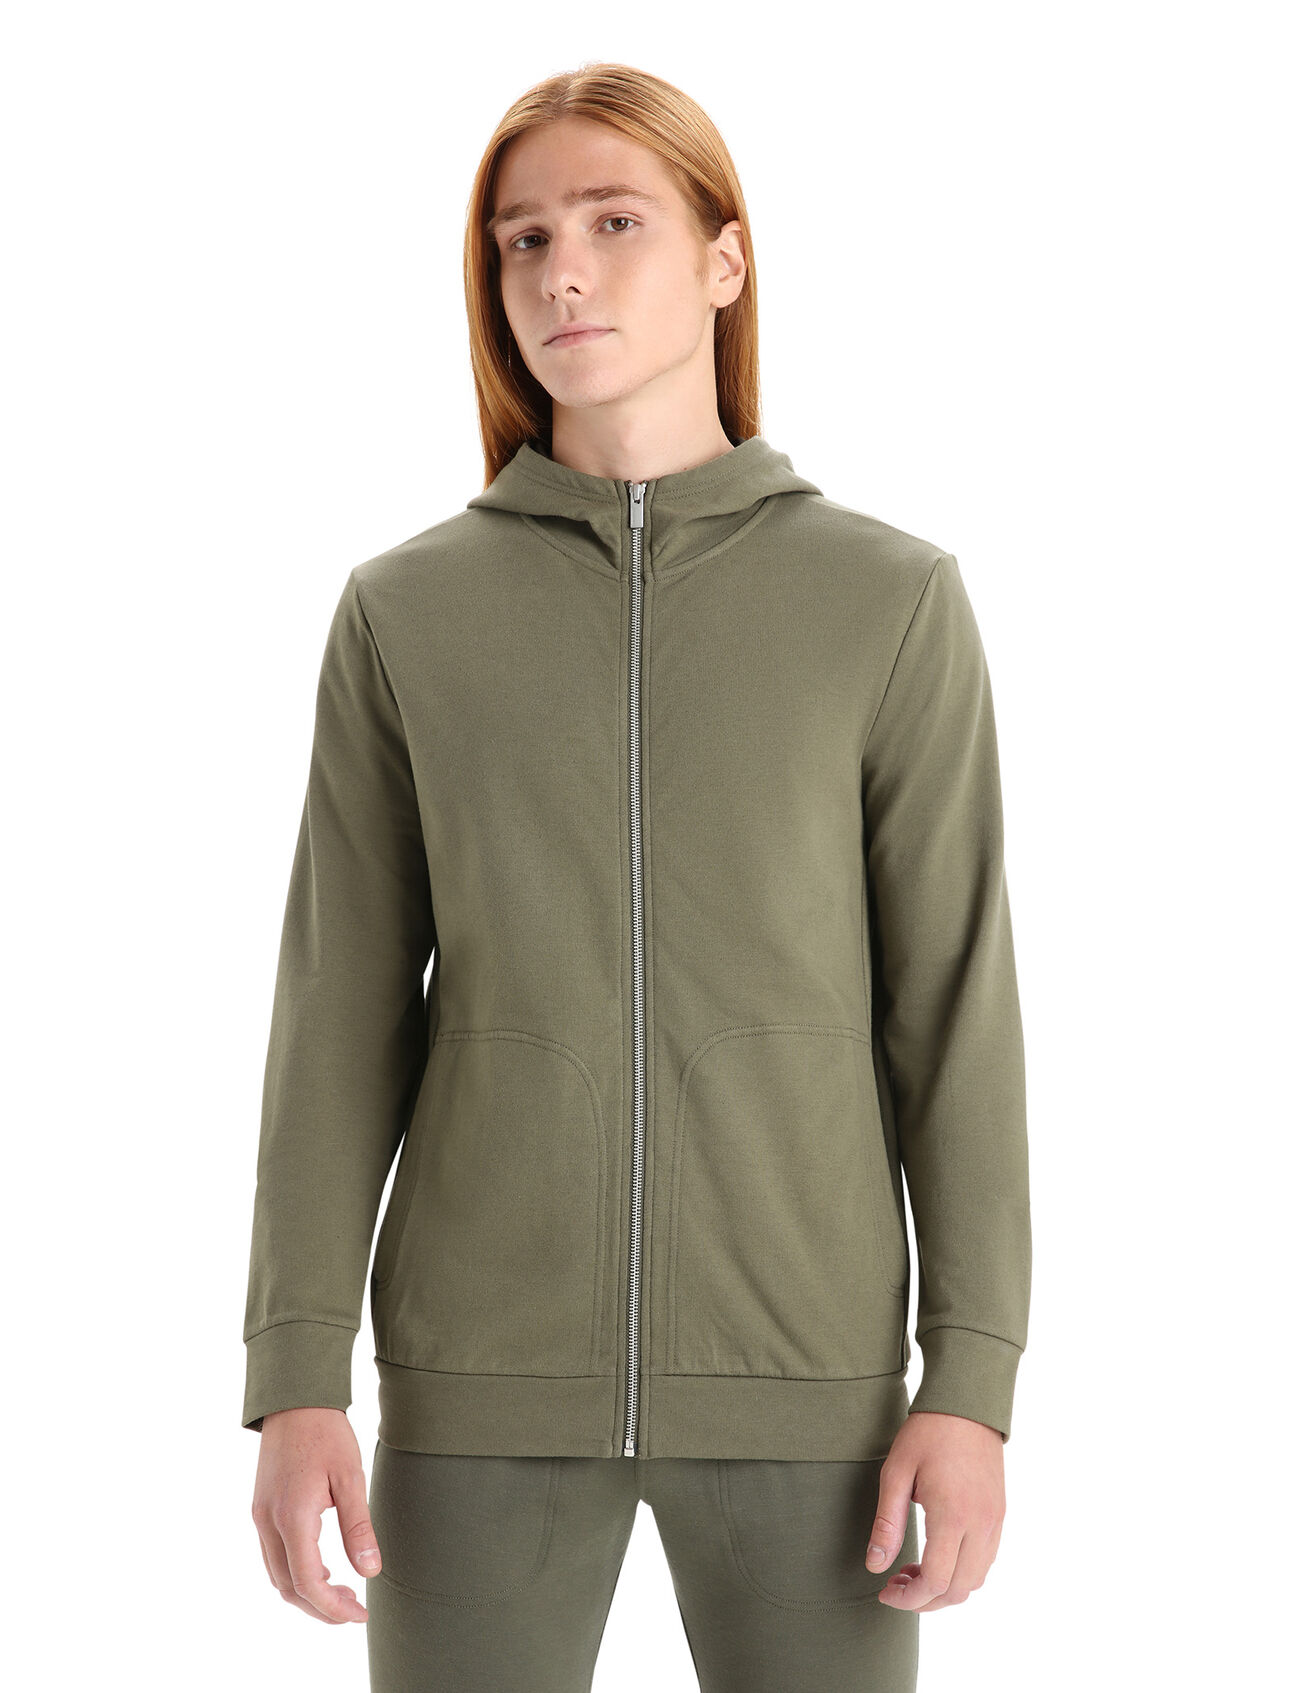 Mens Merino Central Classic Long Sleeve Zip Hoodie A clean, classic and comfortable everyday hooded sweatshirt that blends natural merino wool with organic cotton, the Central Classic Long Sleeve Zip Hoodie is durable, breathable and incredibly versatile.